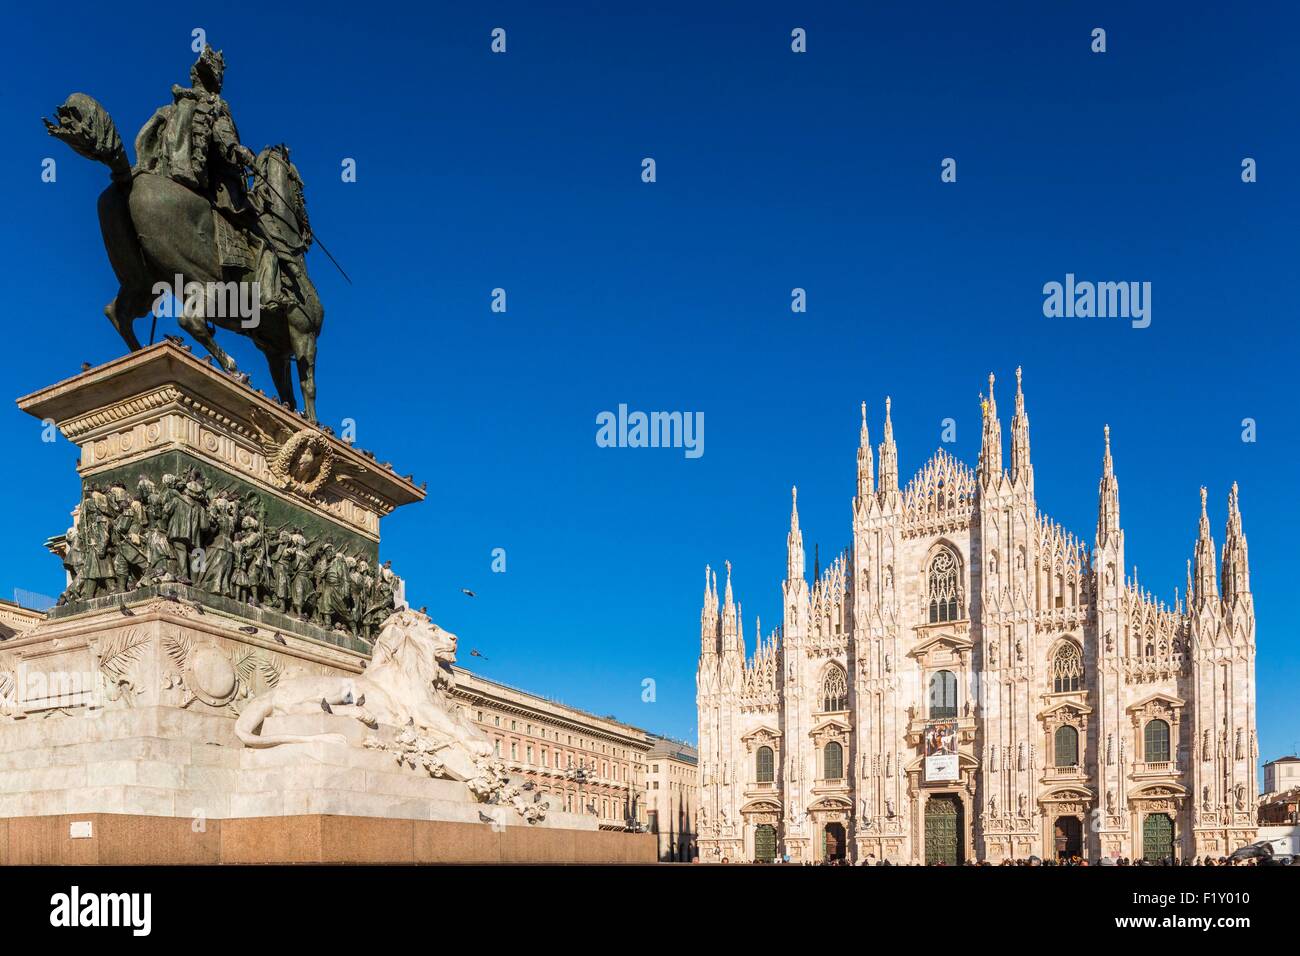 Italy, Lombardy, Milan, Piazza del Duomo, equestrian statue of Victor Emmanuel II of Italy (1820-1878) and the Cathedral of the Nativity of the Holy Virgin (Duomo) built between the 14th century and the 19th century Stock Photo